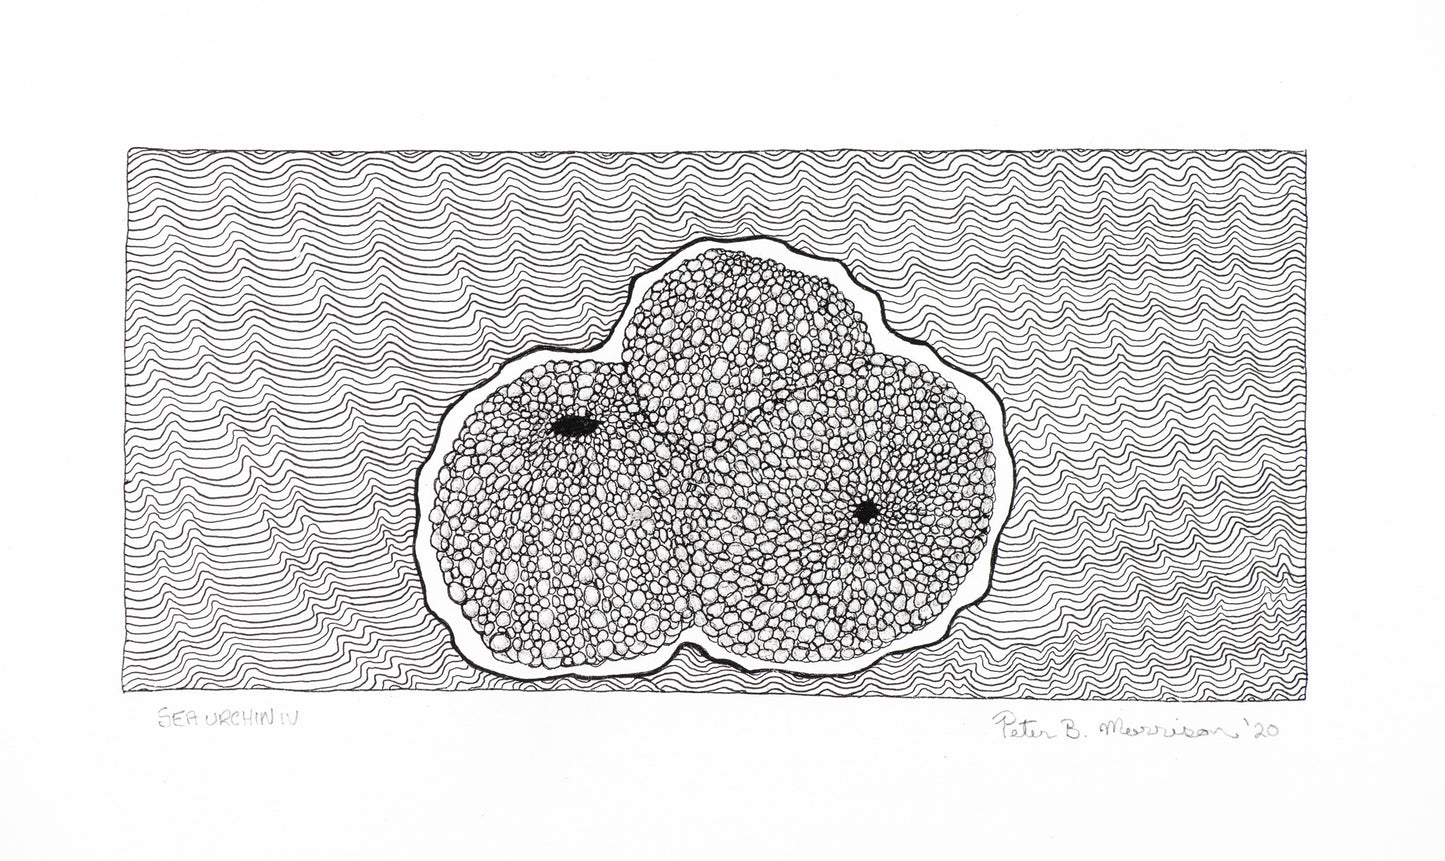 PETER B MORRISON | 'Sea Urchin IV' Drawing | Pen and ink on archival paper